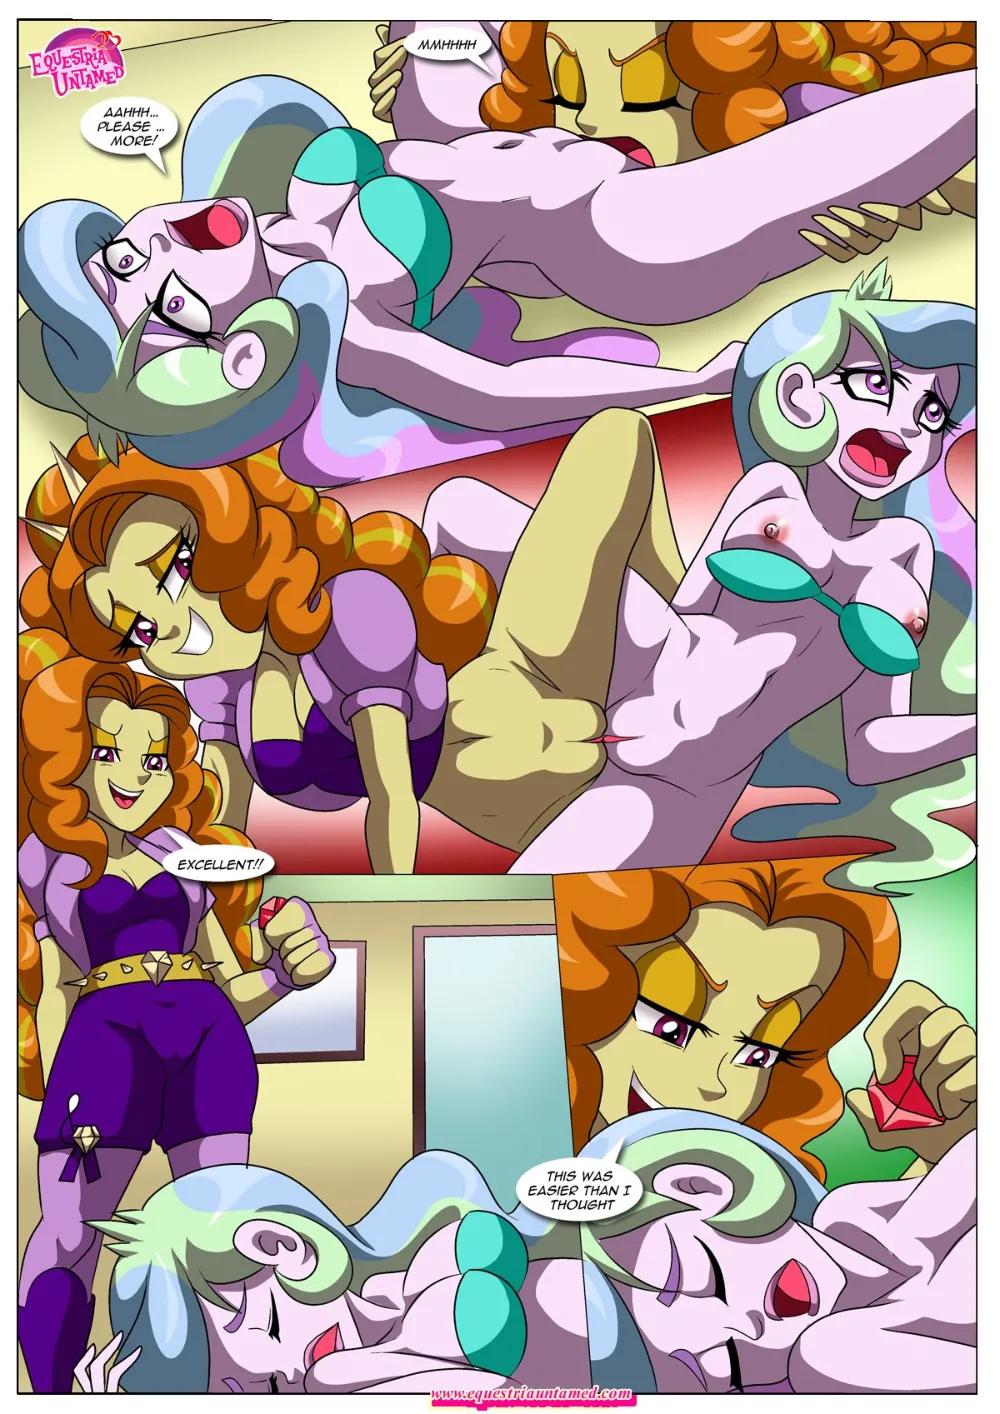 The Dazzlings Revenge - Page 7